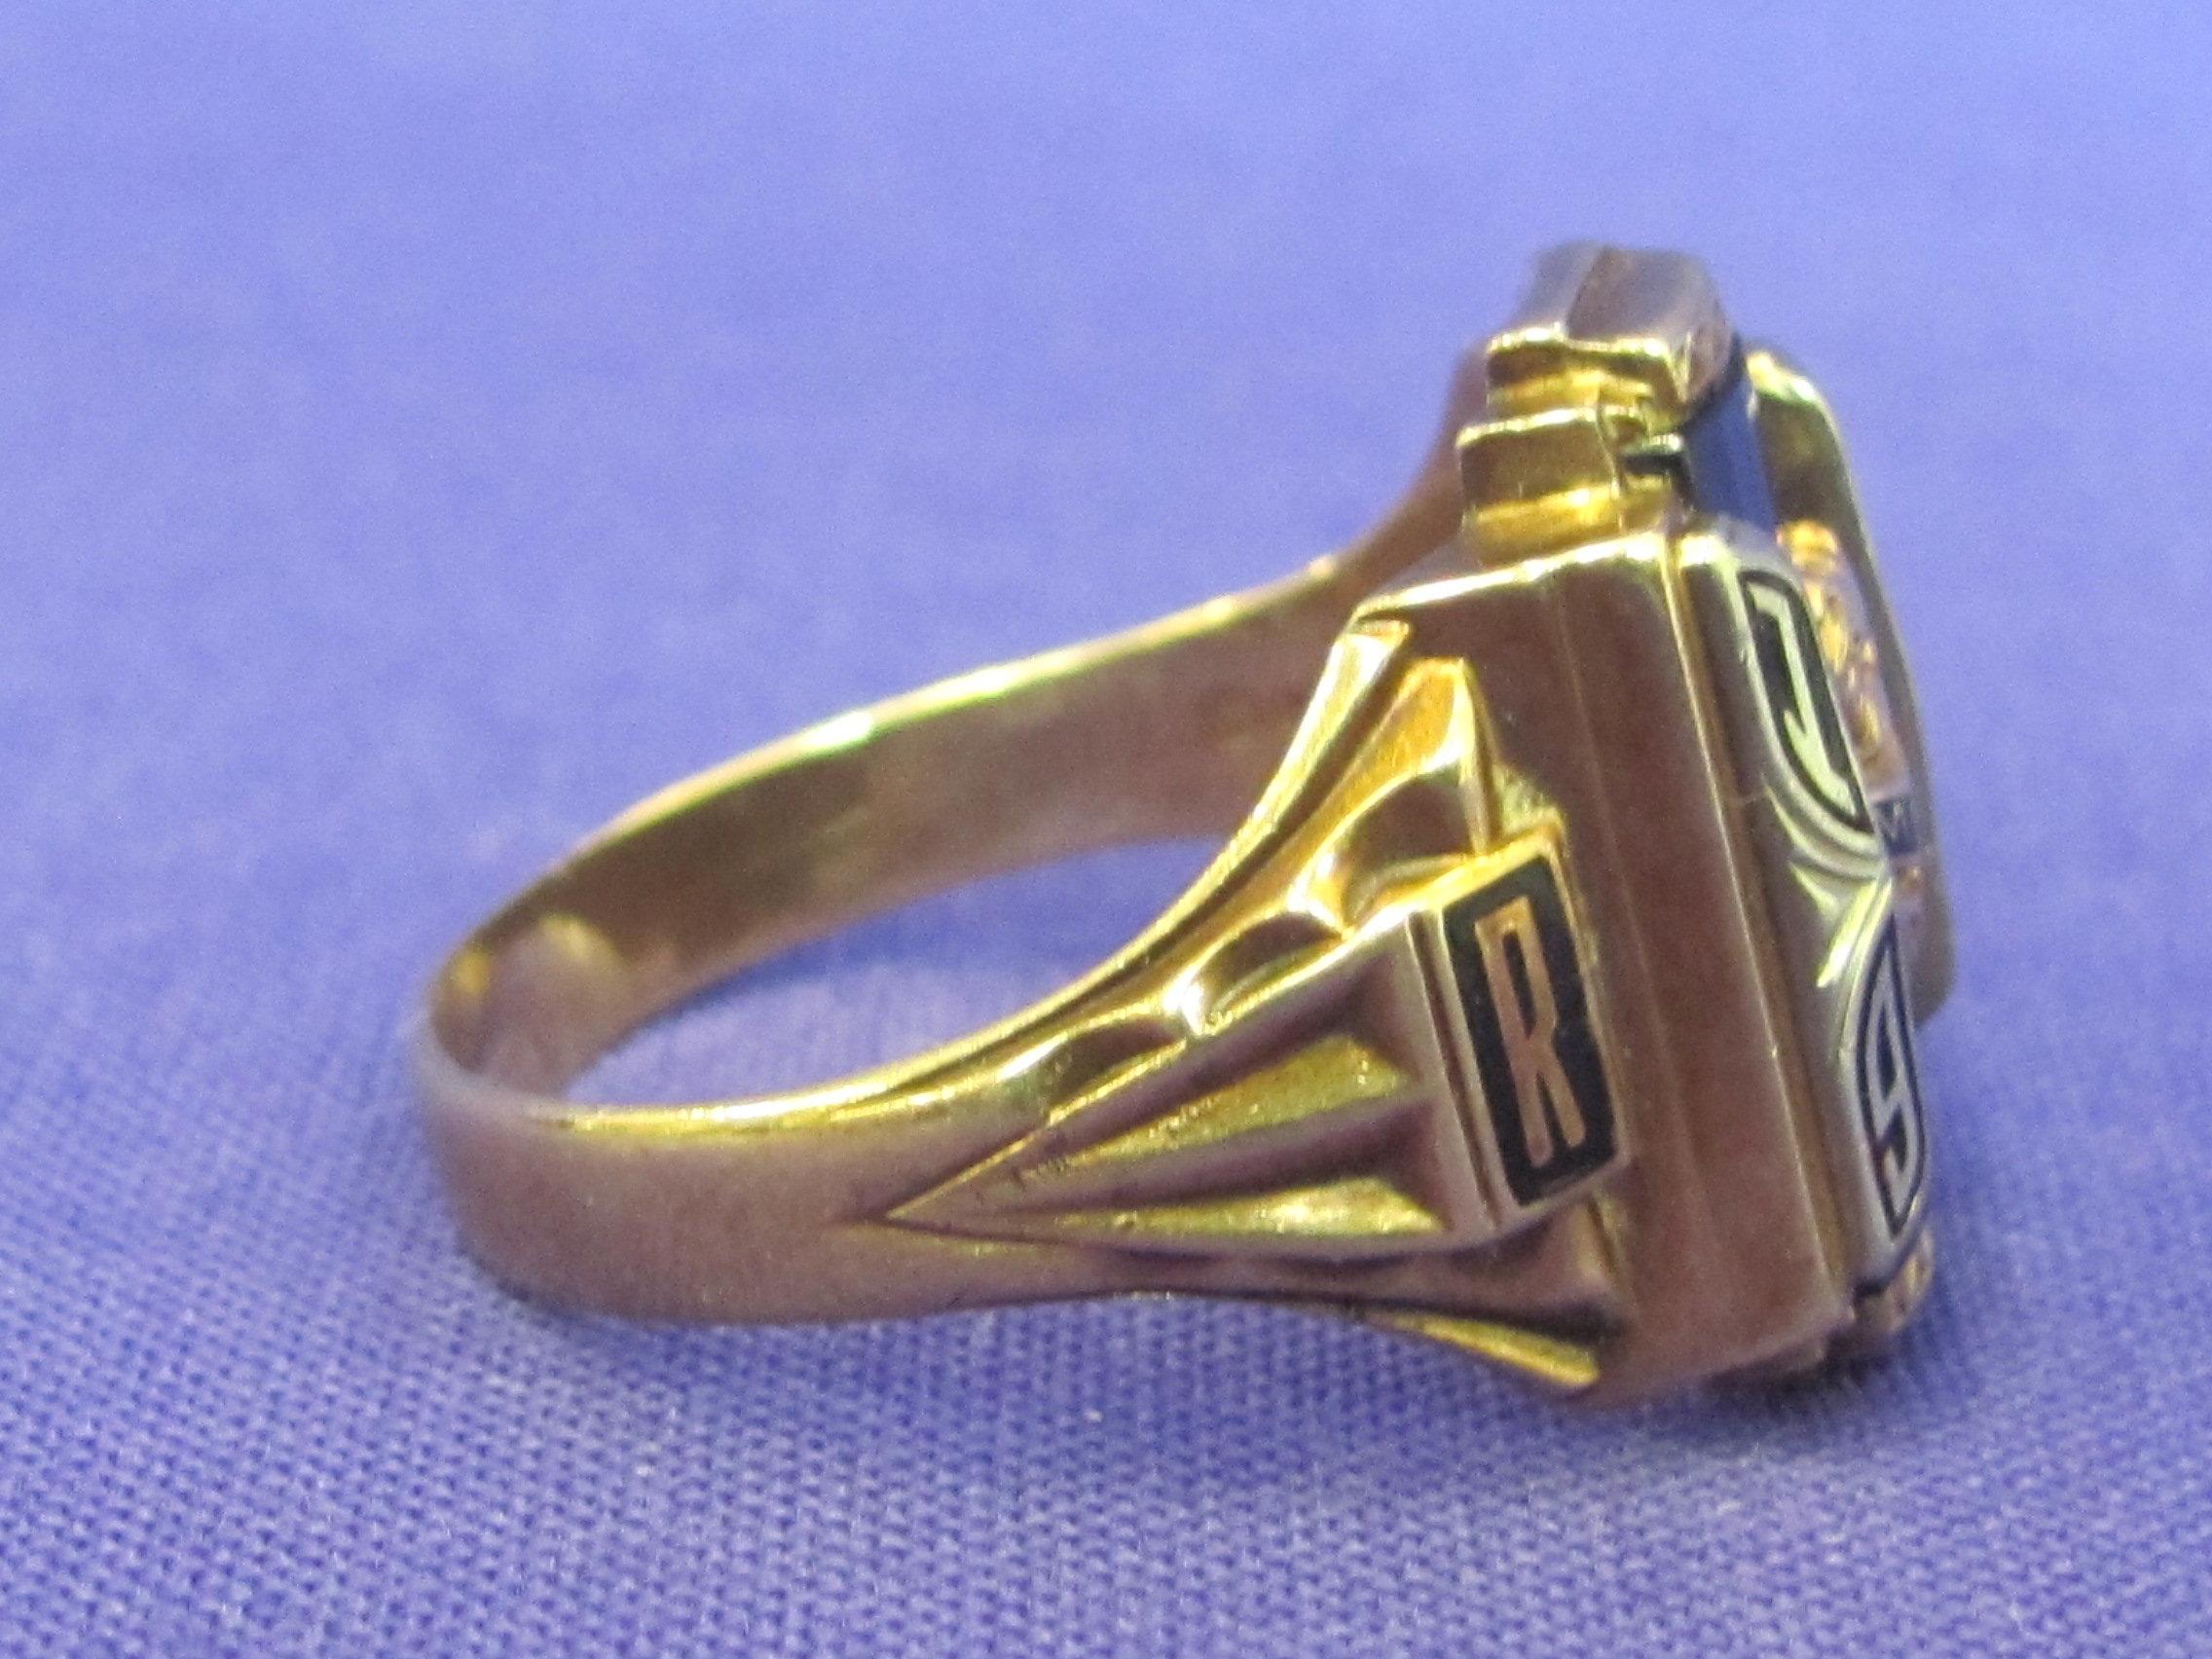 10 Kt Gold Class Ring – 1966 w Bulldog “MFL HS” - Size 13.5 – Weight is 13.3 grams